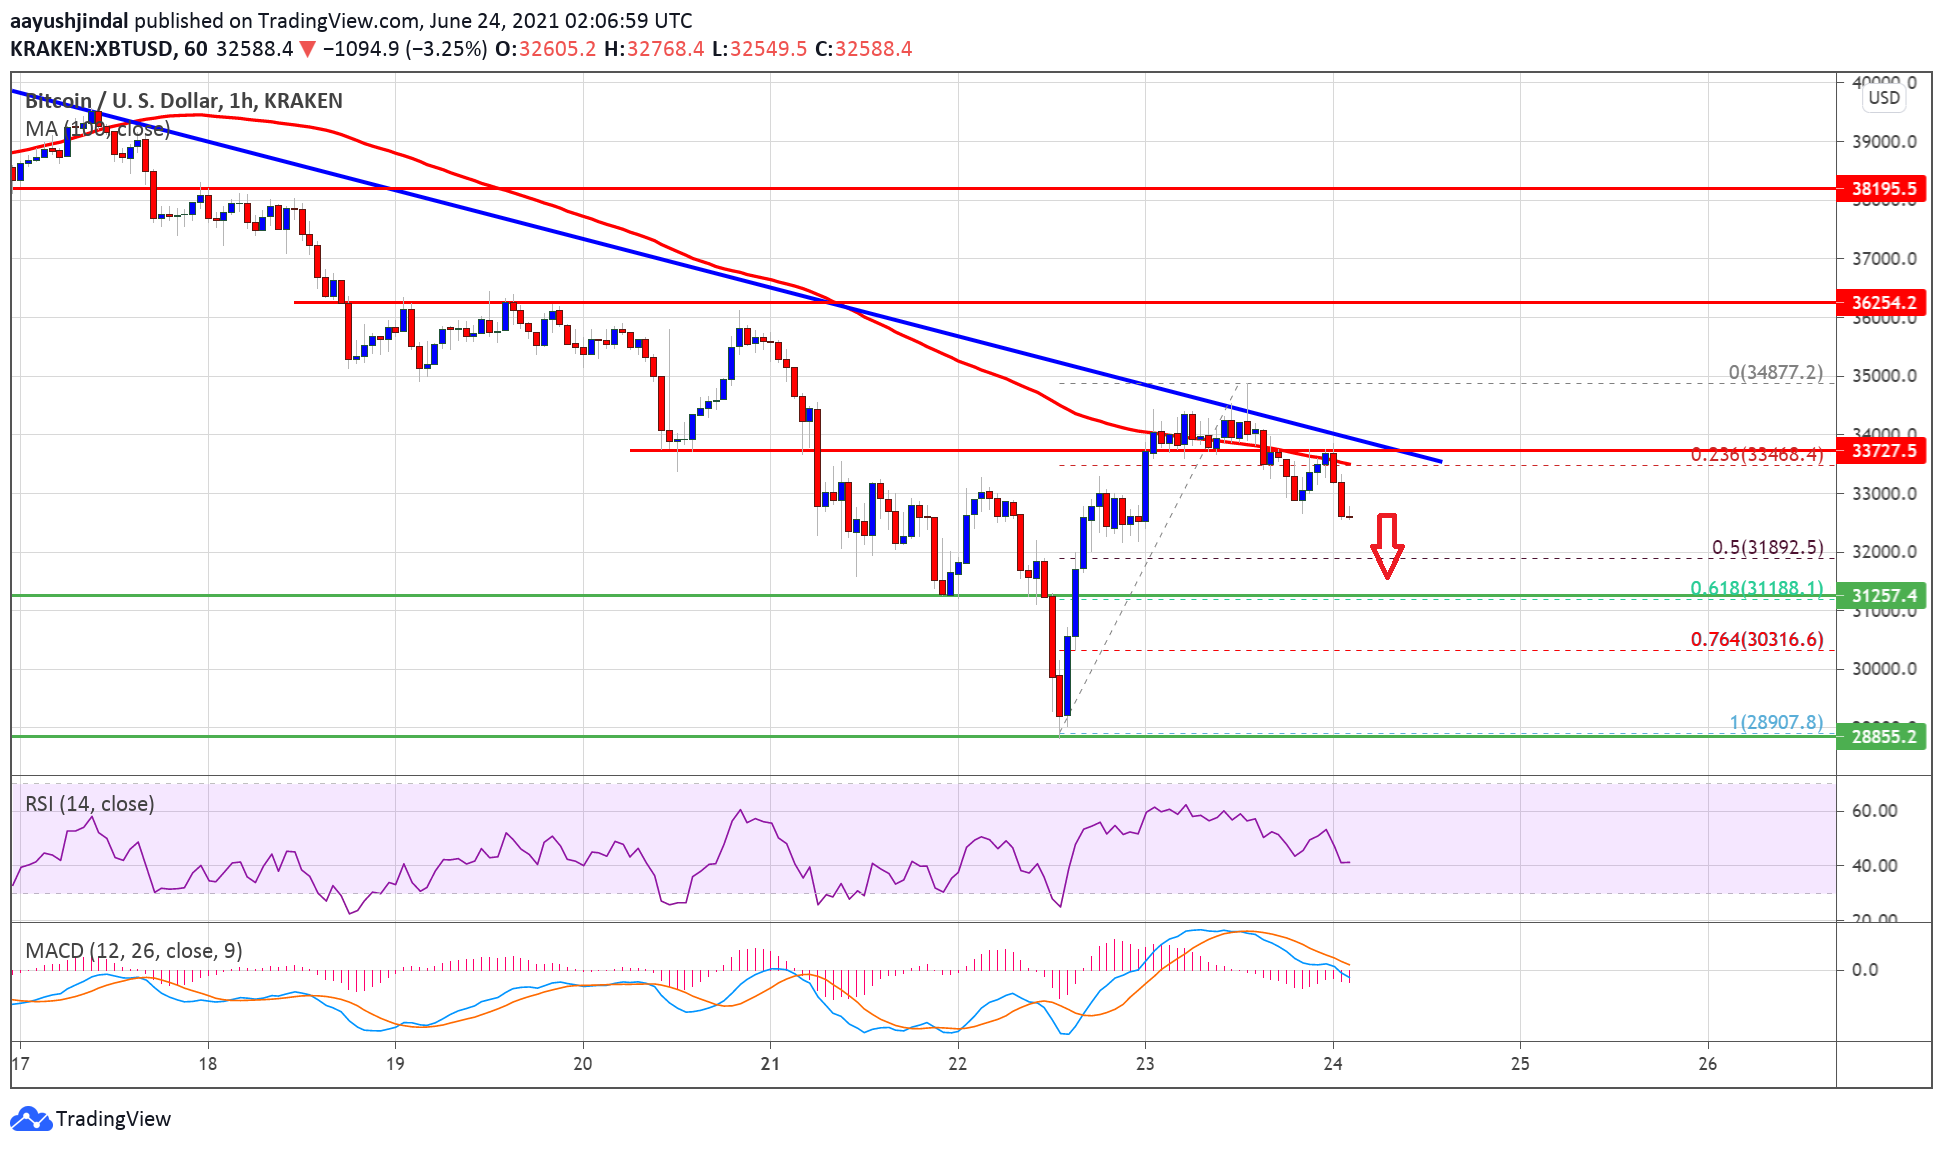 TA: Bitcoin Tops Near $35K, What Could Trigger Fresh Decline To $30K